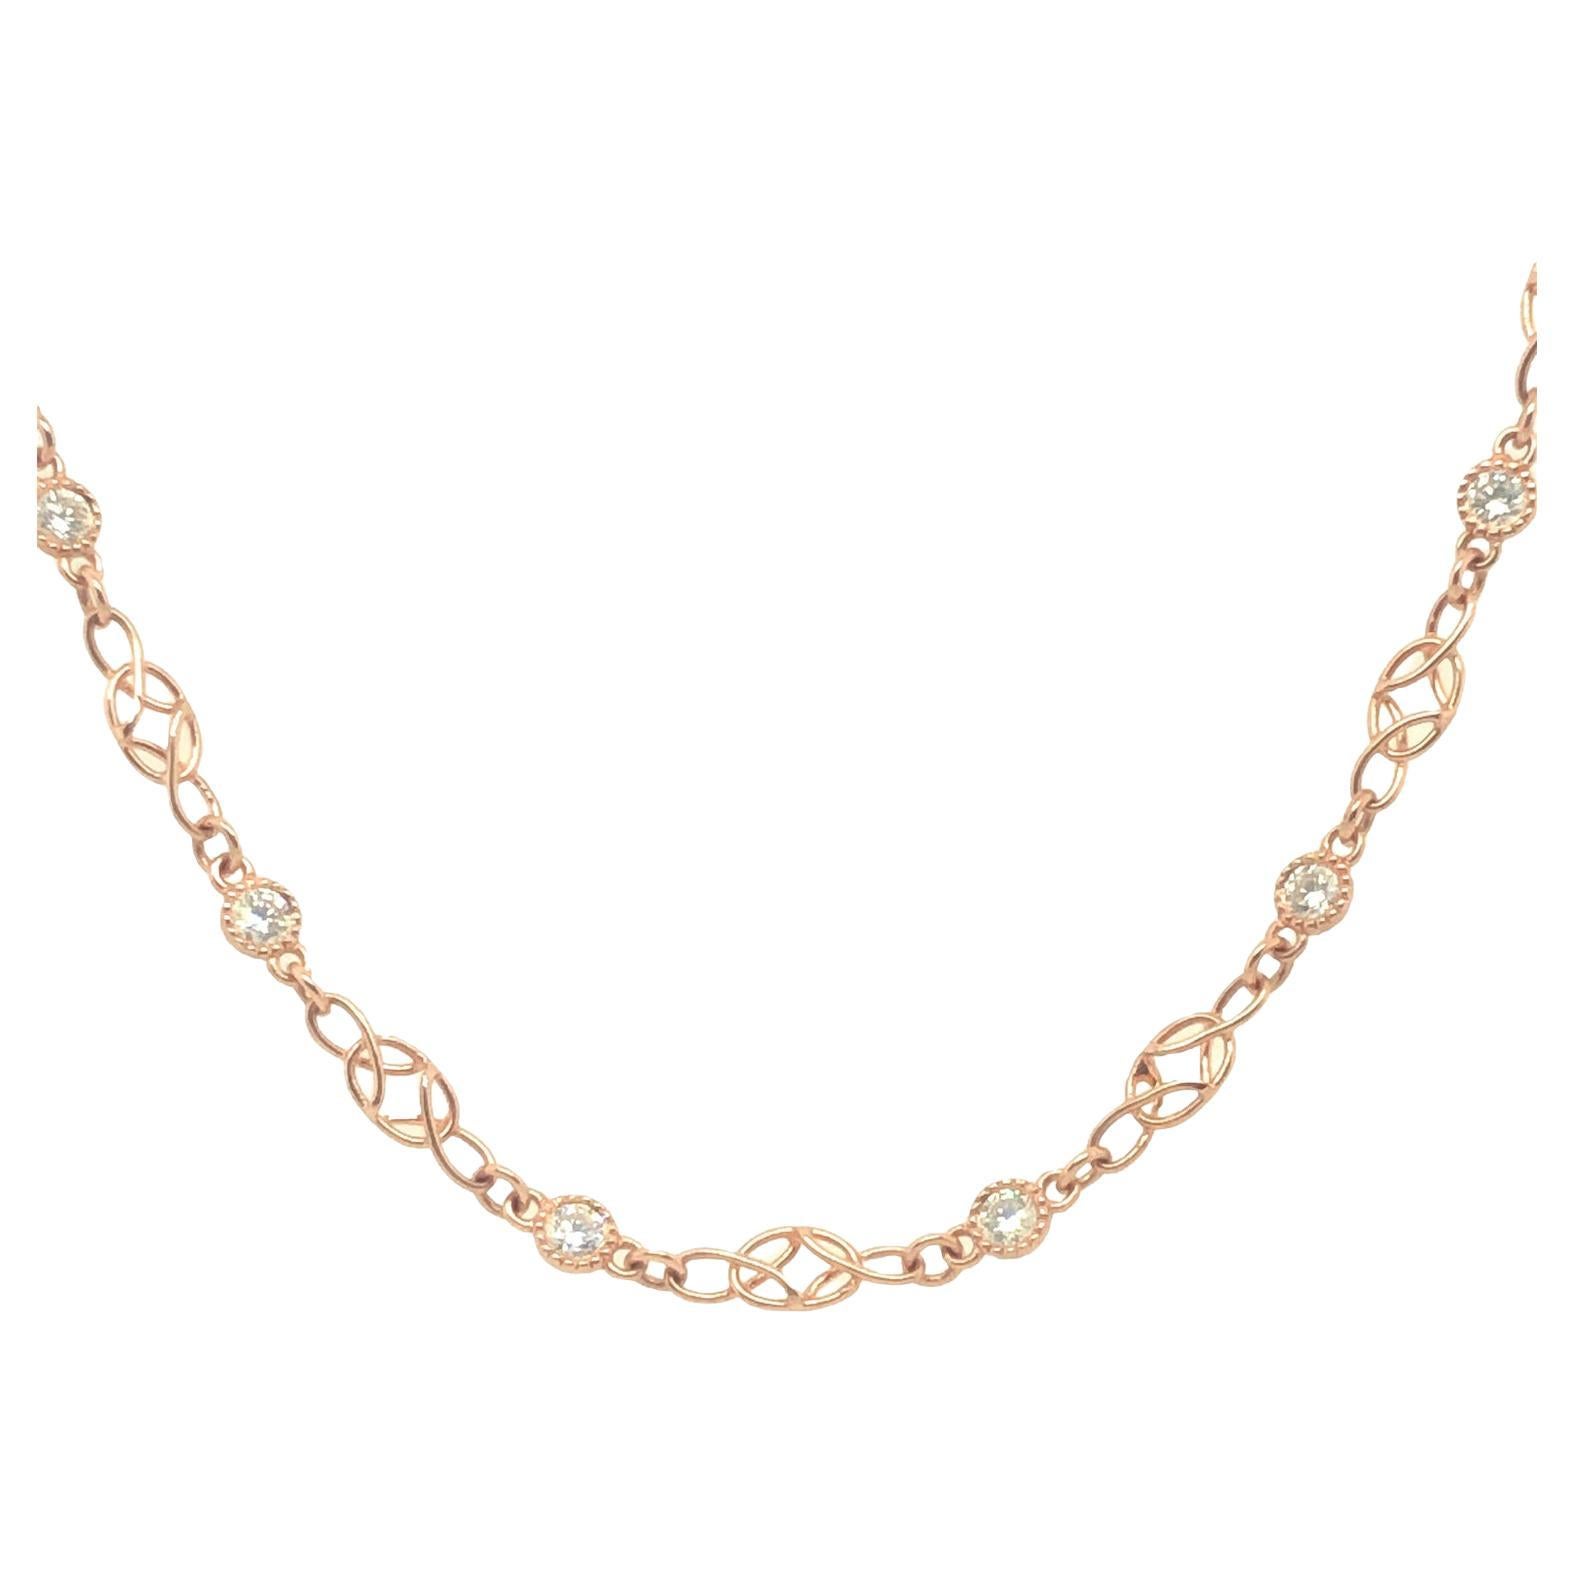 Gems Are Forever Antique Style 1.44 Ct Diamond Link Chain Necklace 18K Rose Gold For Sale